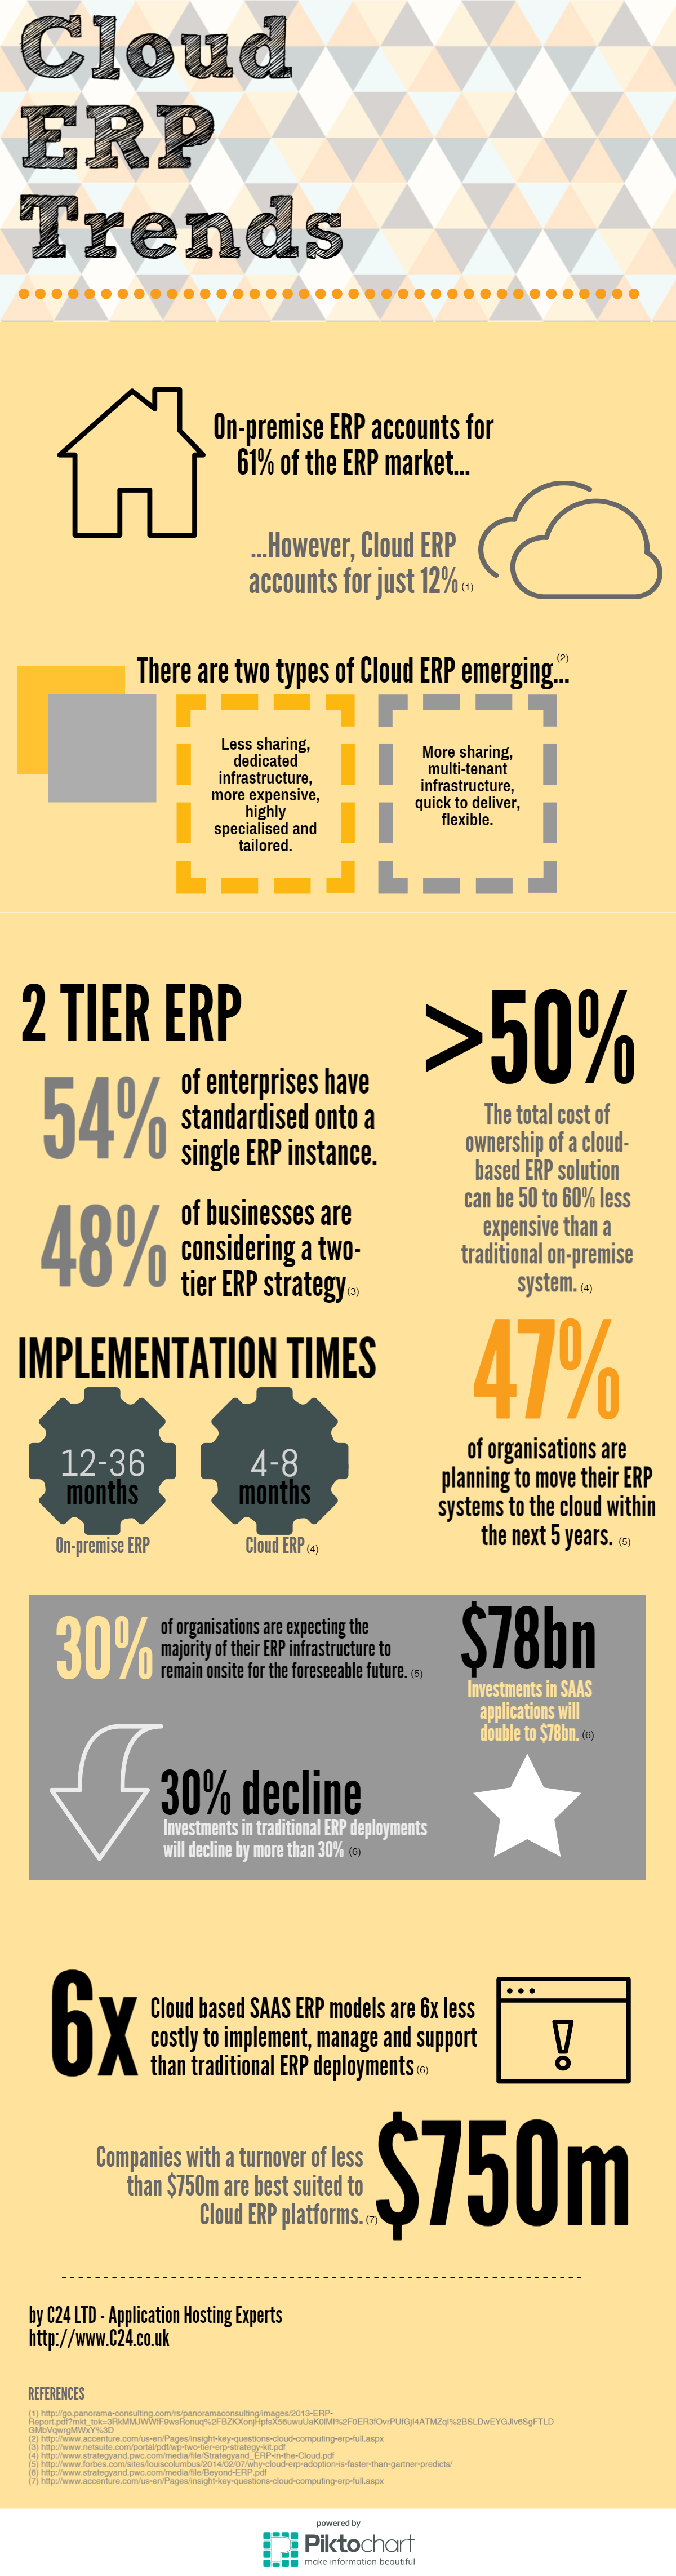 C24 ERP Infographic by C24